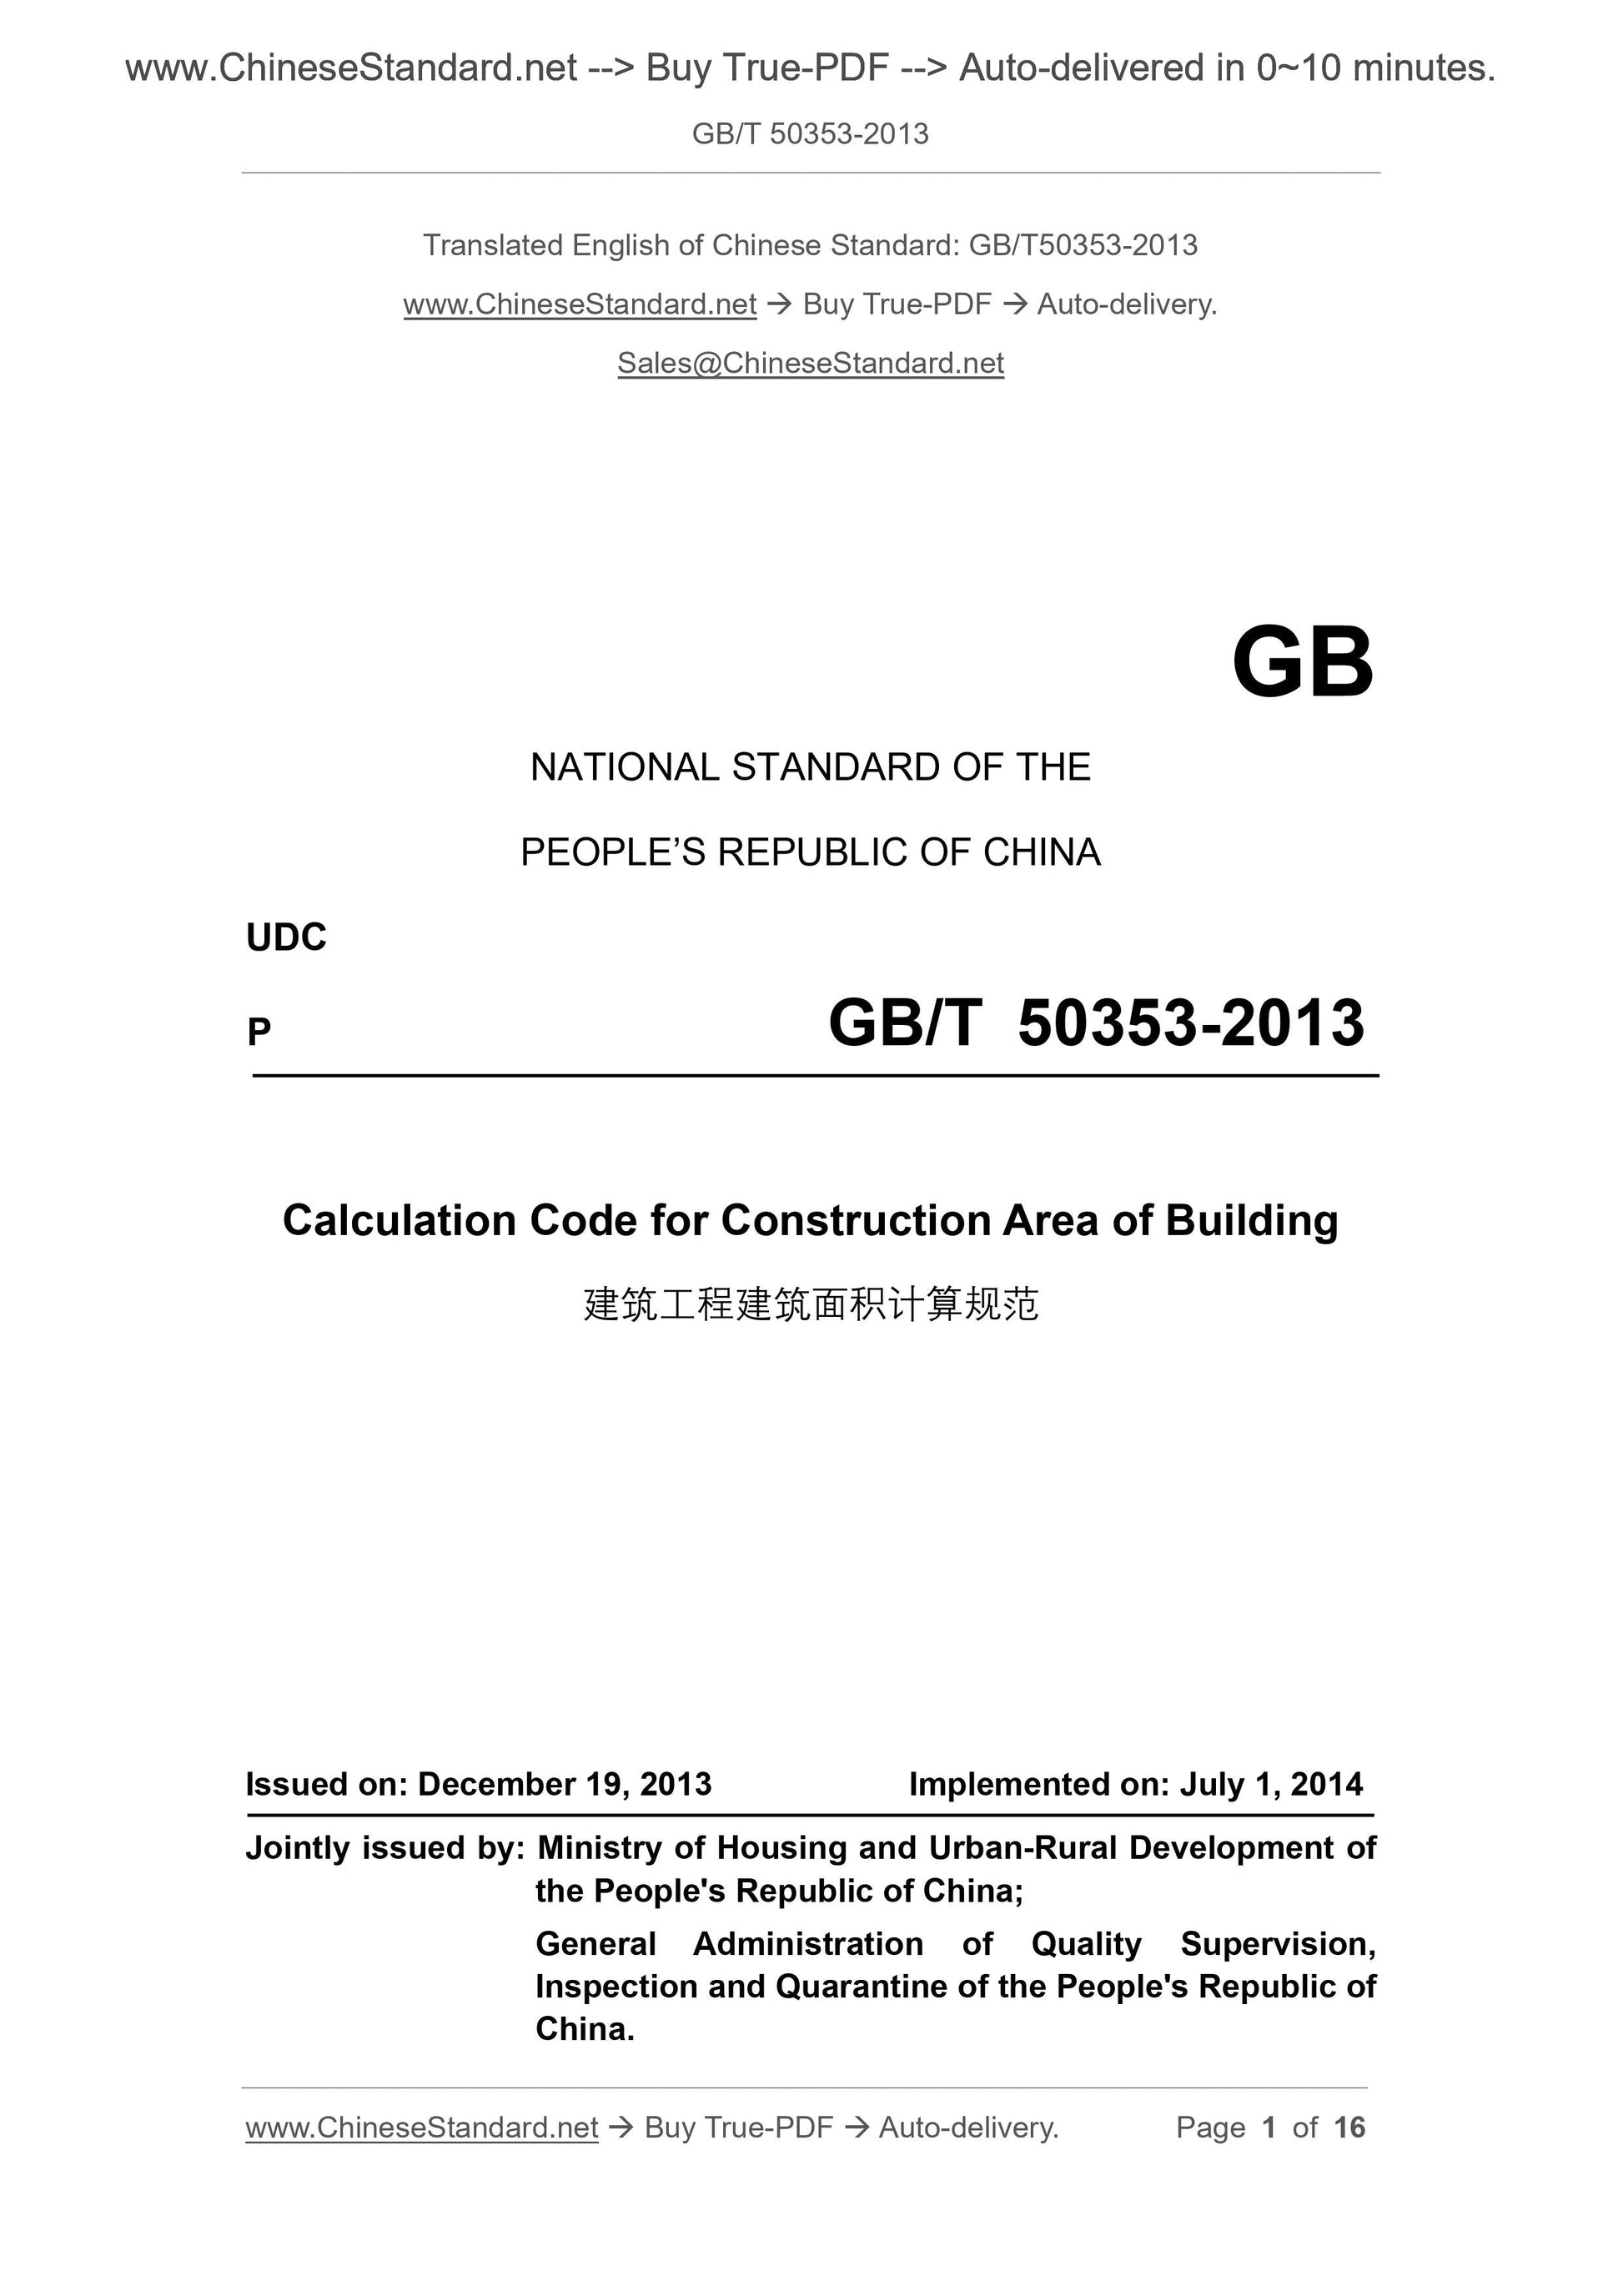 GB/T 50353-2013 Page 1